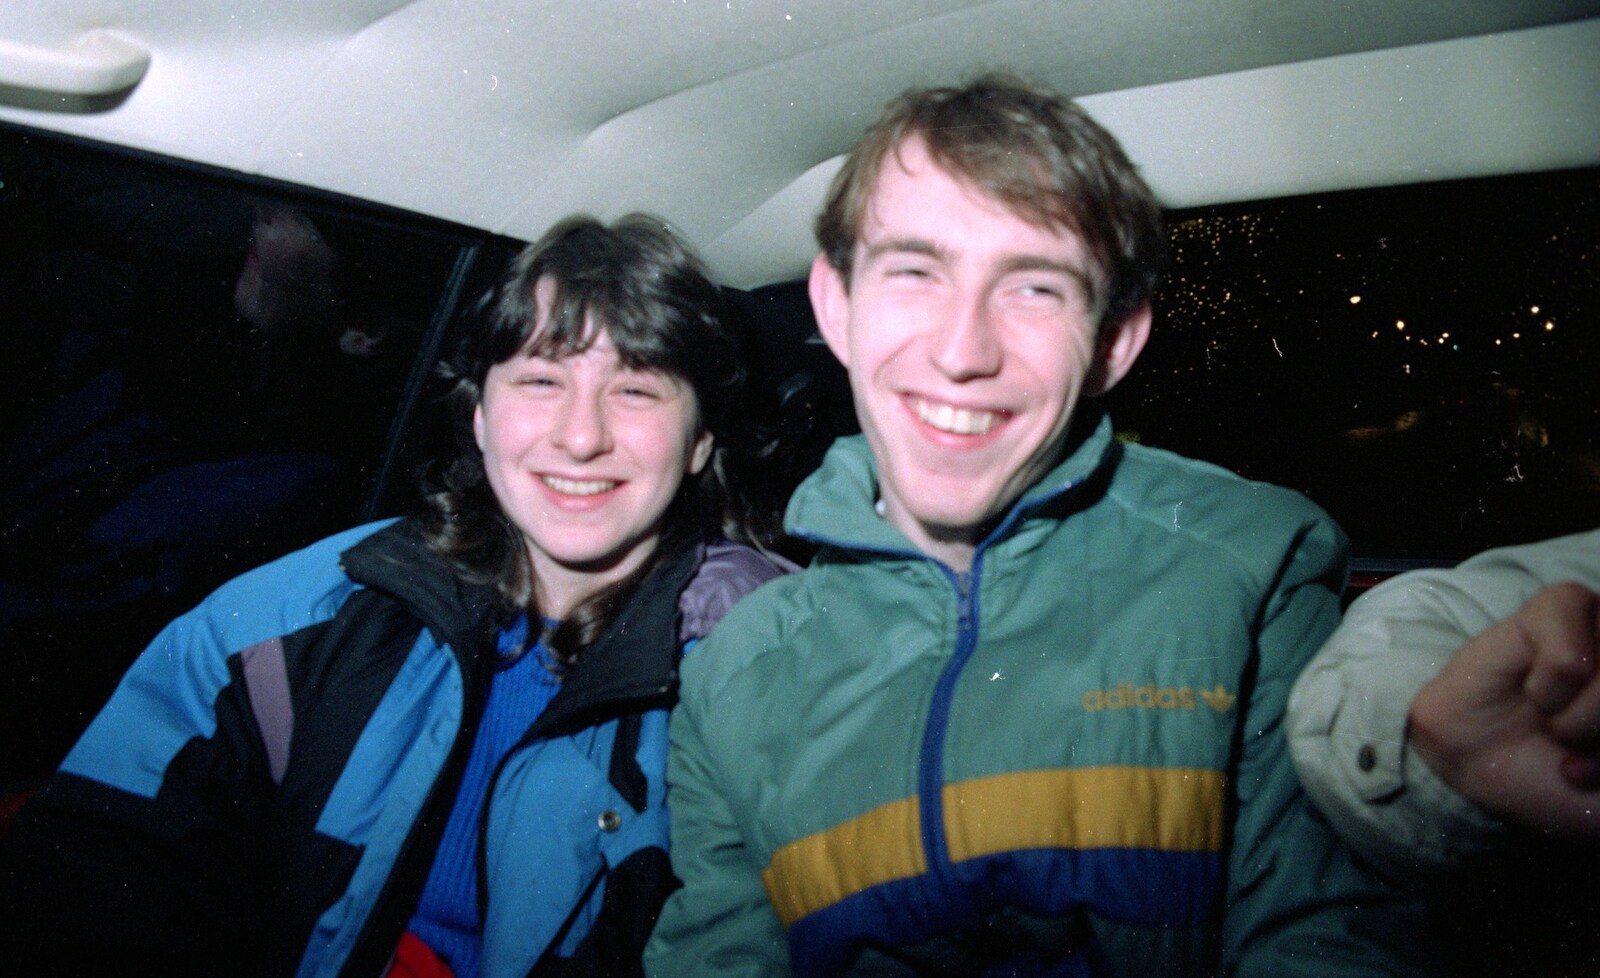 Uni: Dartmoor Night and Day, Dartmouth and a bit of Jiu Jitsu, Devon - 29th April 1989: Jackie and Dave in the back of Kate's car